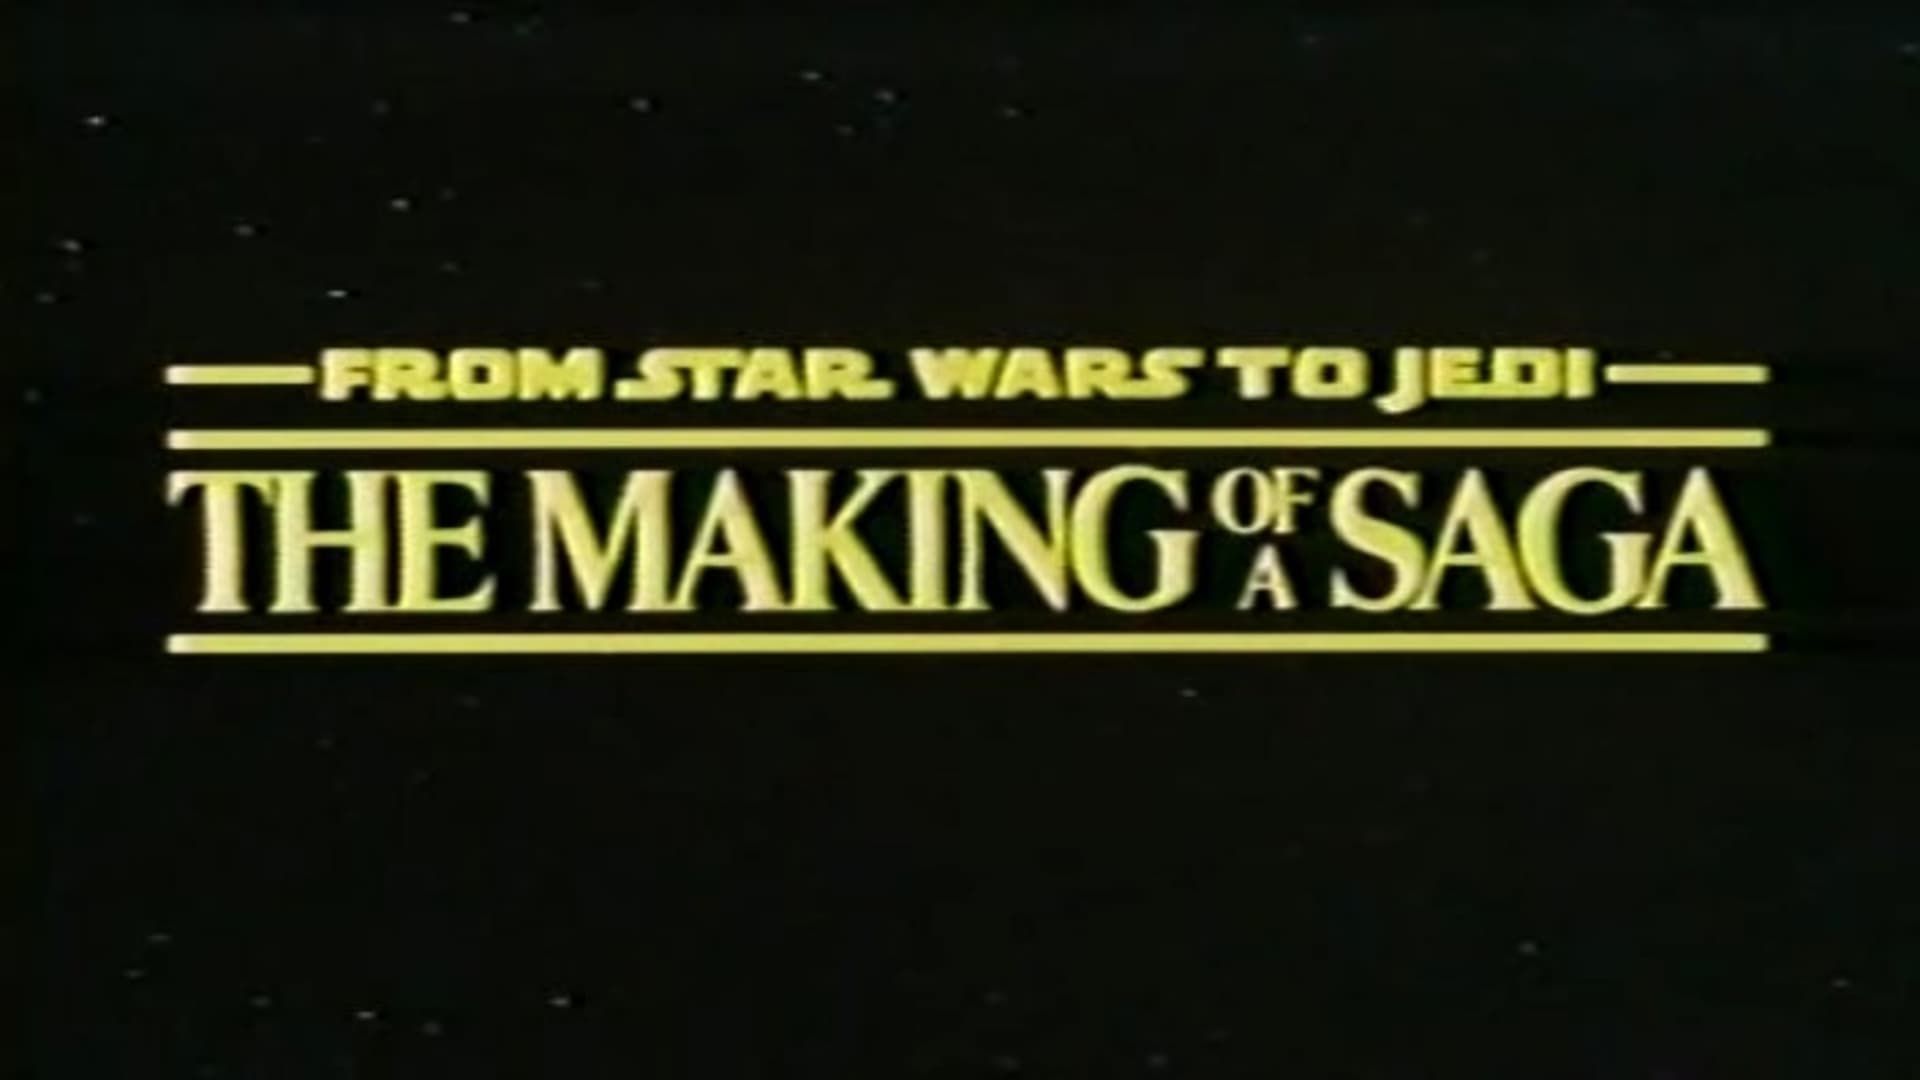 From 'Star Wars' to 'Jedi': The Making of a Saga background